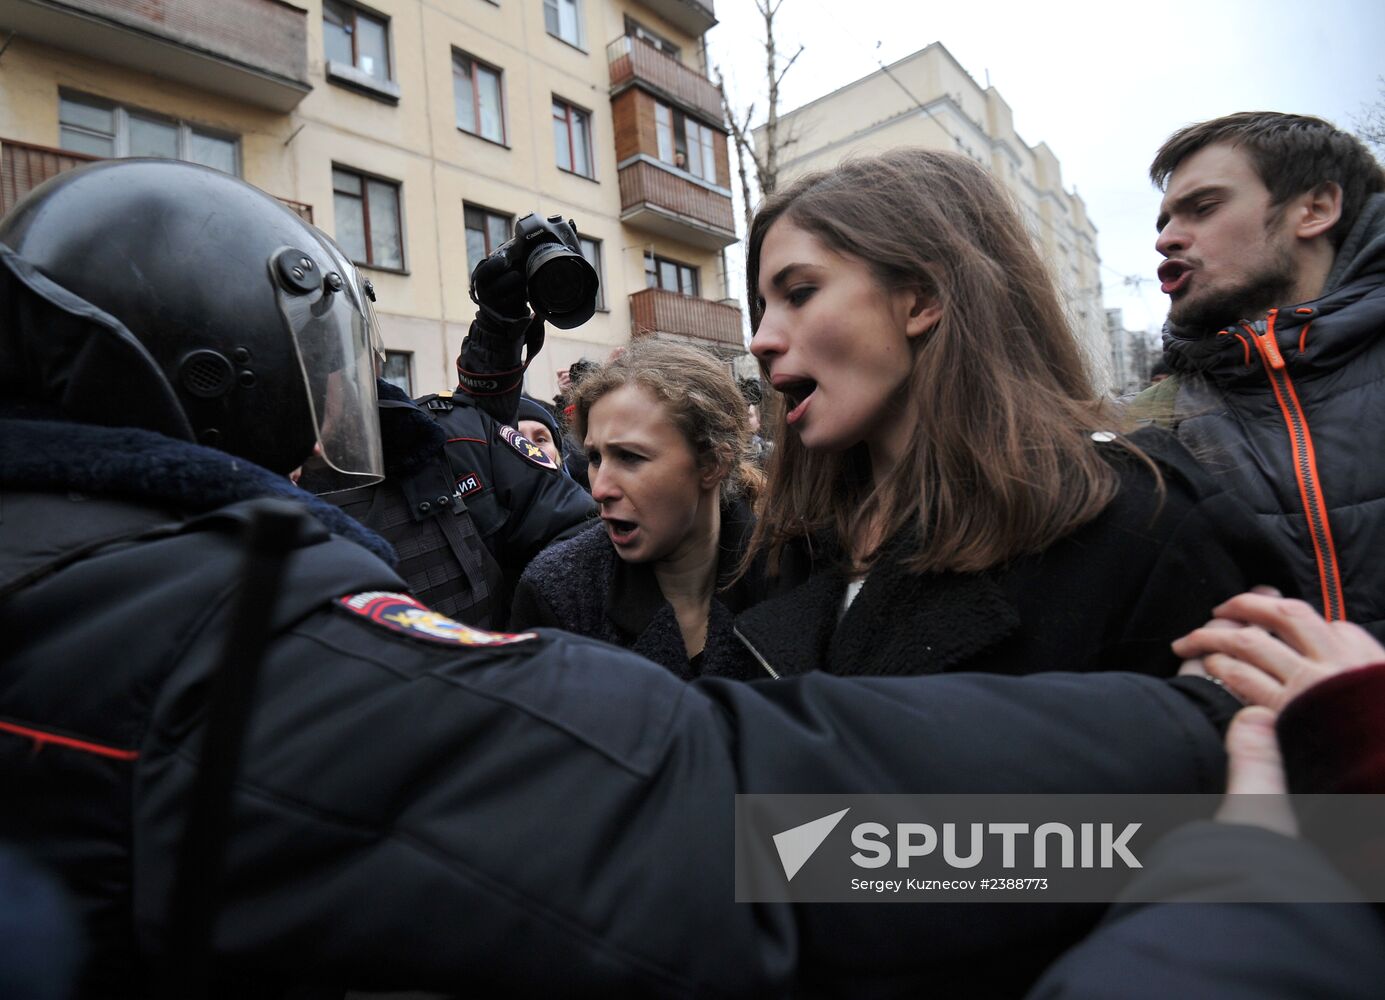 Verdict in Bolotnaya Square criminal case of May 6, 2012 to be announced